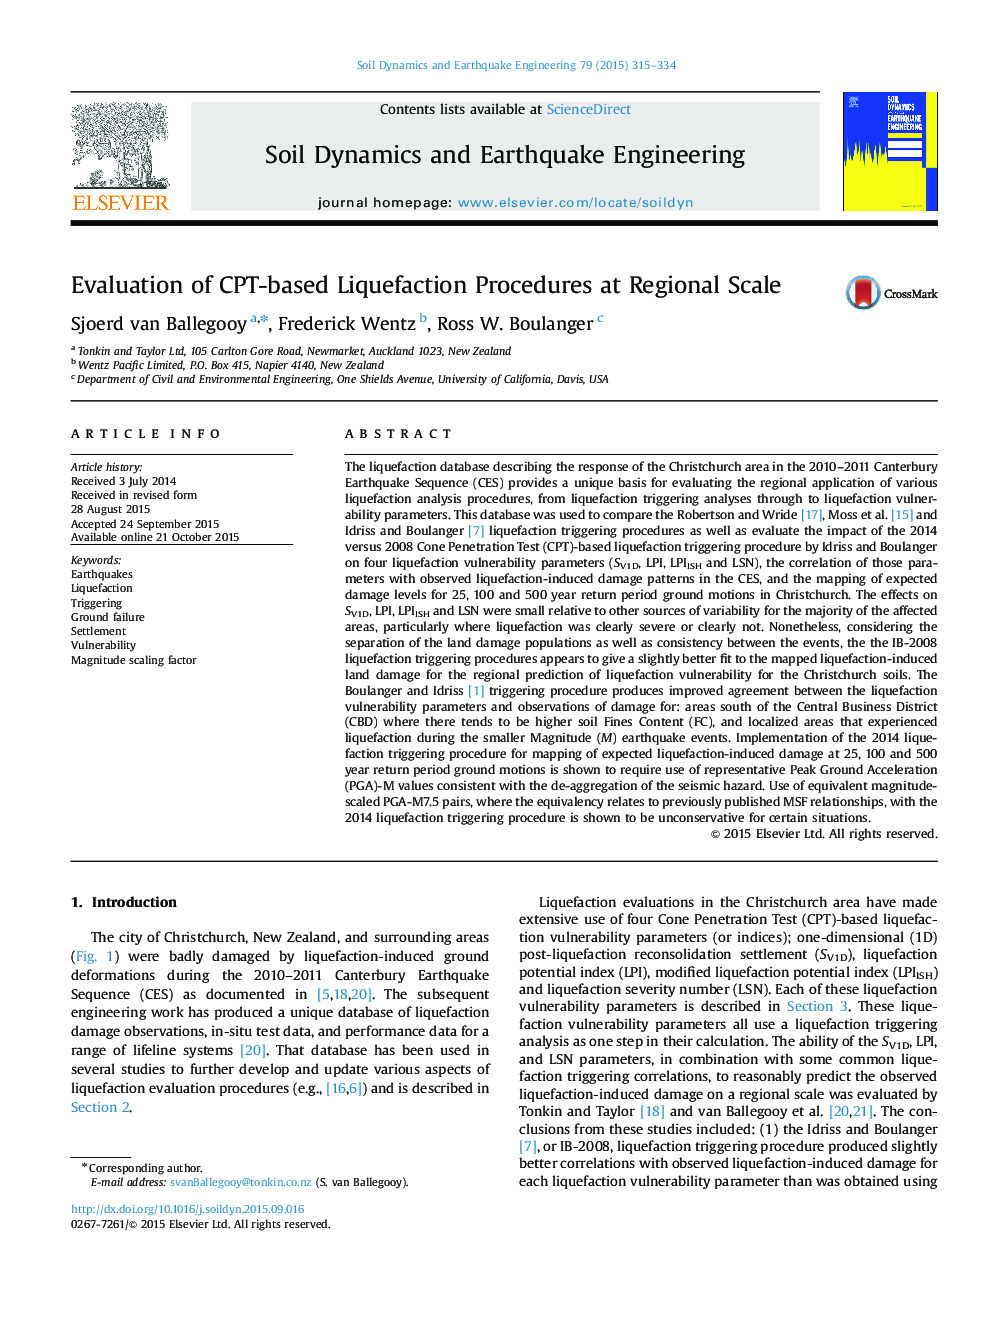 Evaluation of CPT-based Liquefaction Procedures at Regional Scale